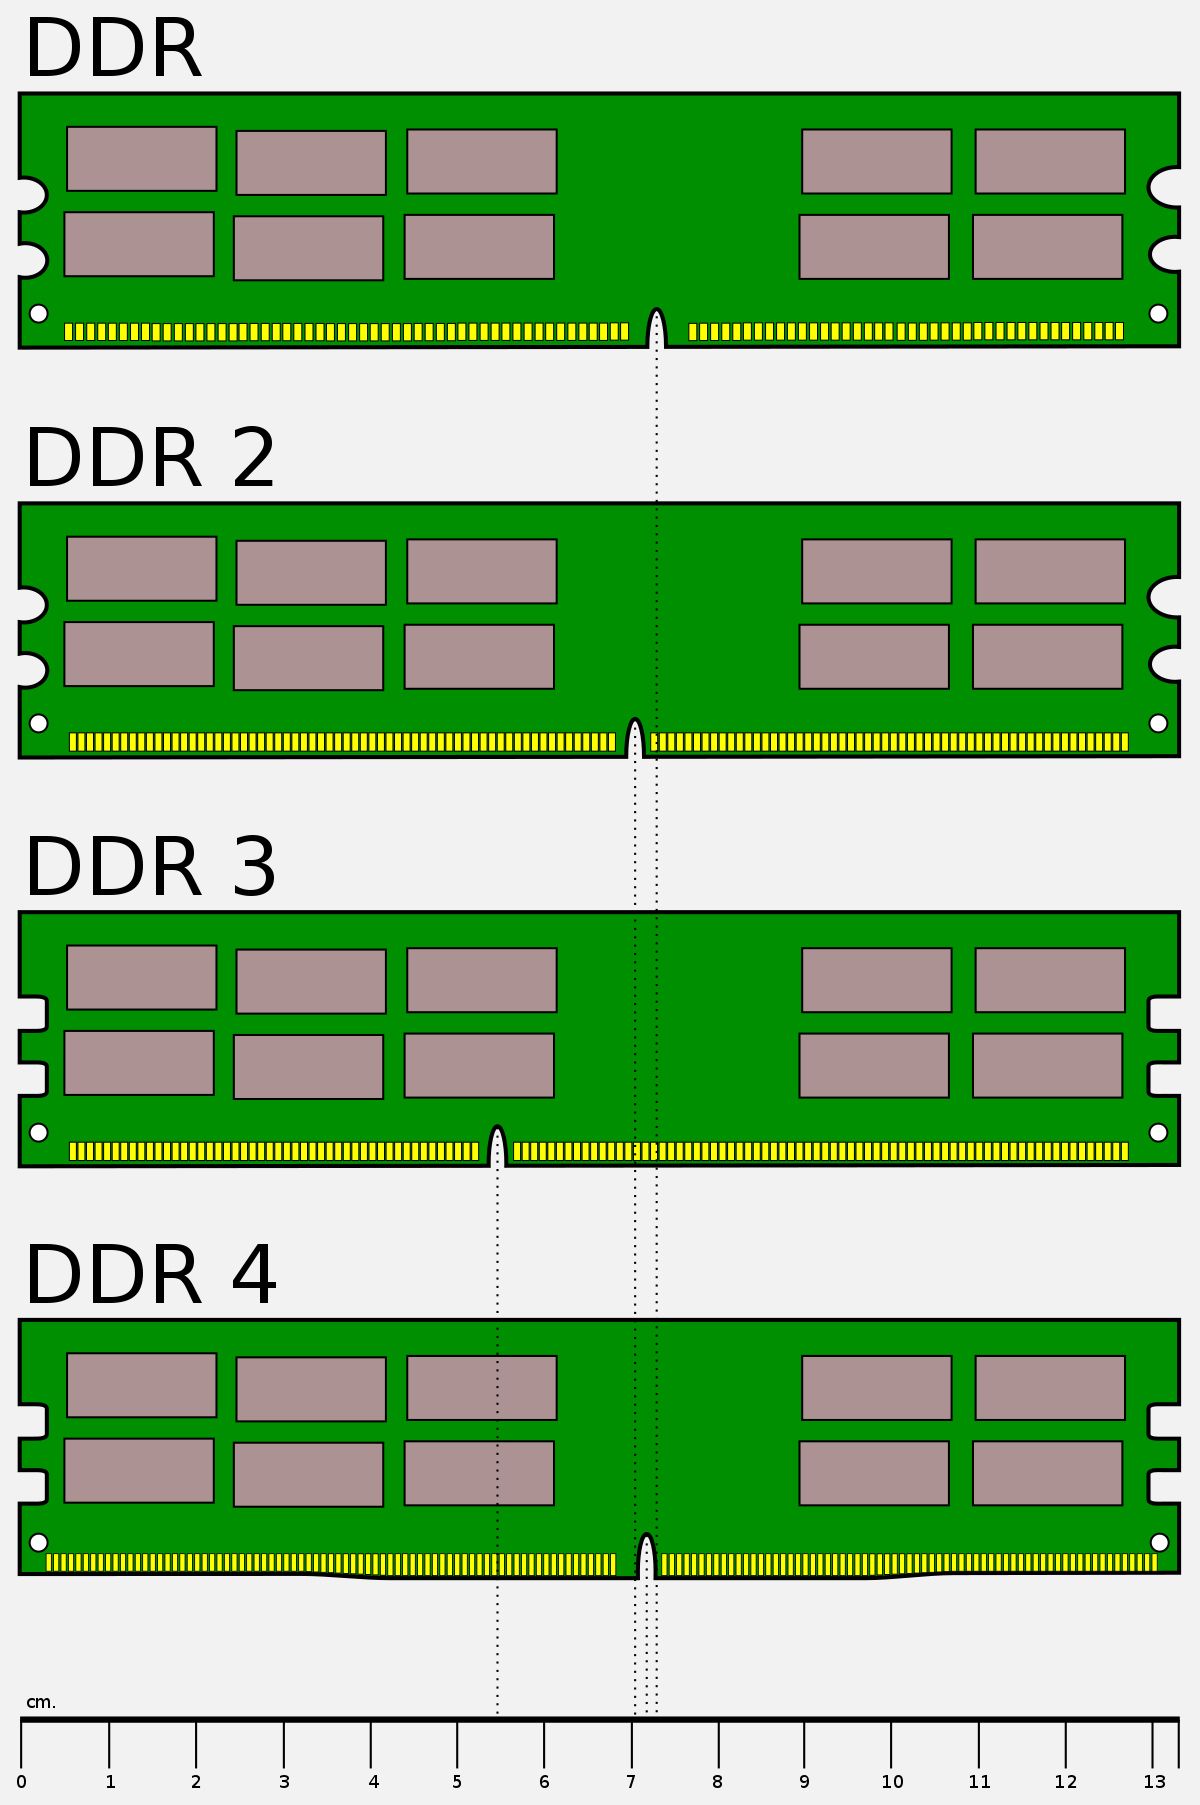 ddr ram slots notch and sizes